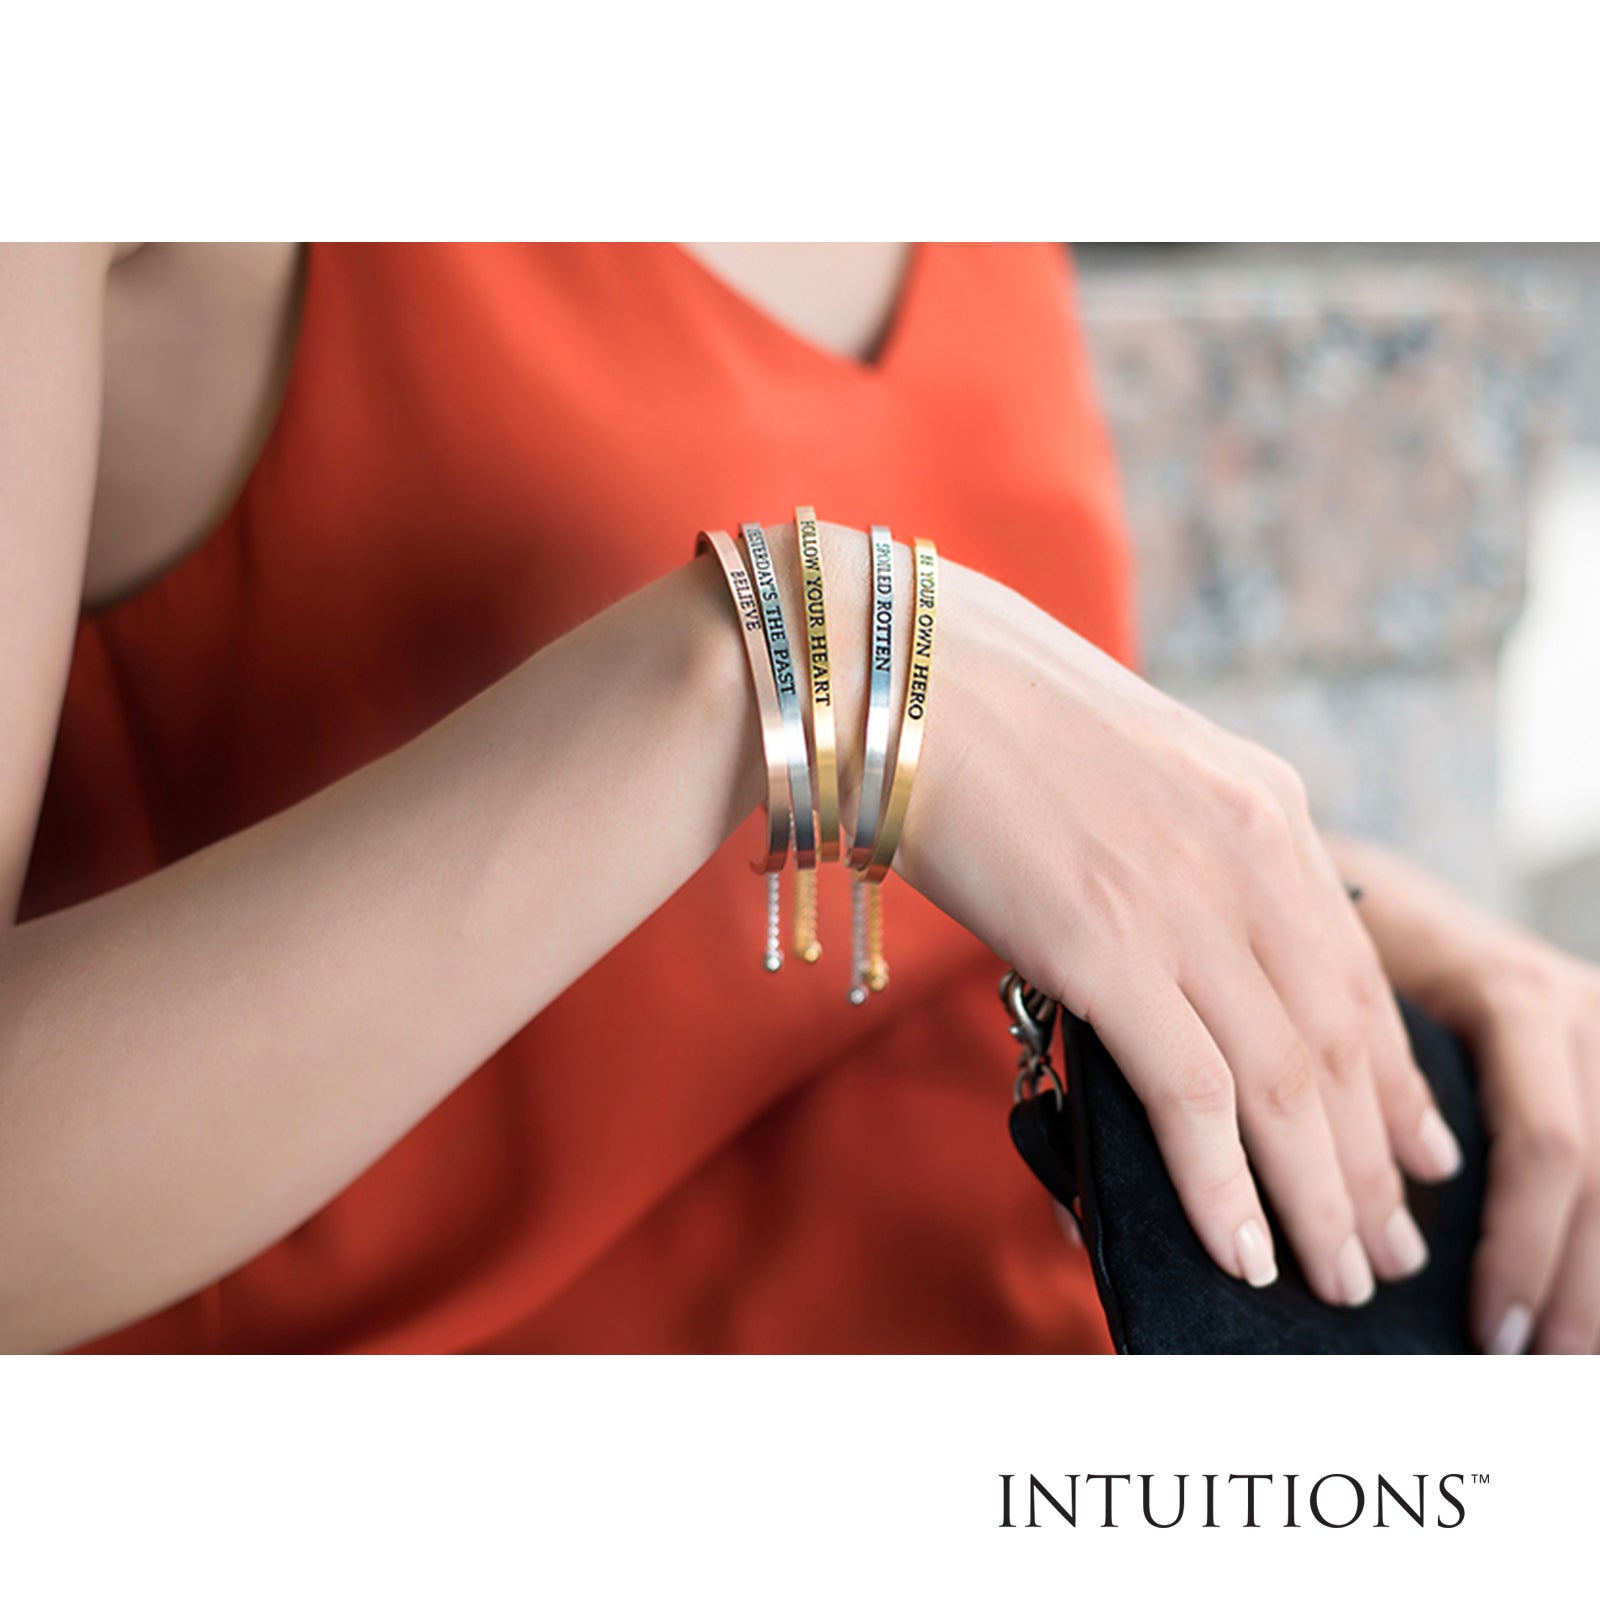 Intuitions Stainless Steel  Joyous, Courageous, Positive November Dark Yellow Birthstone Bangle Bracelet